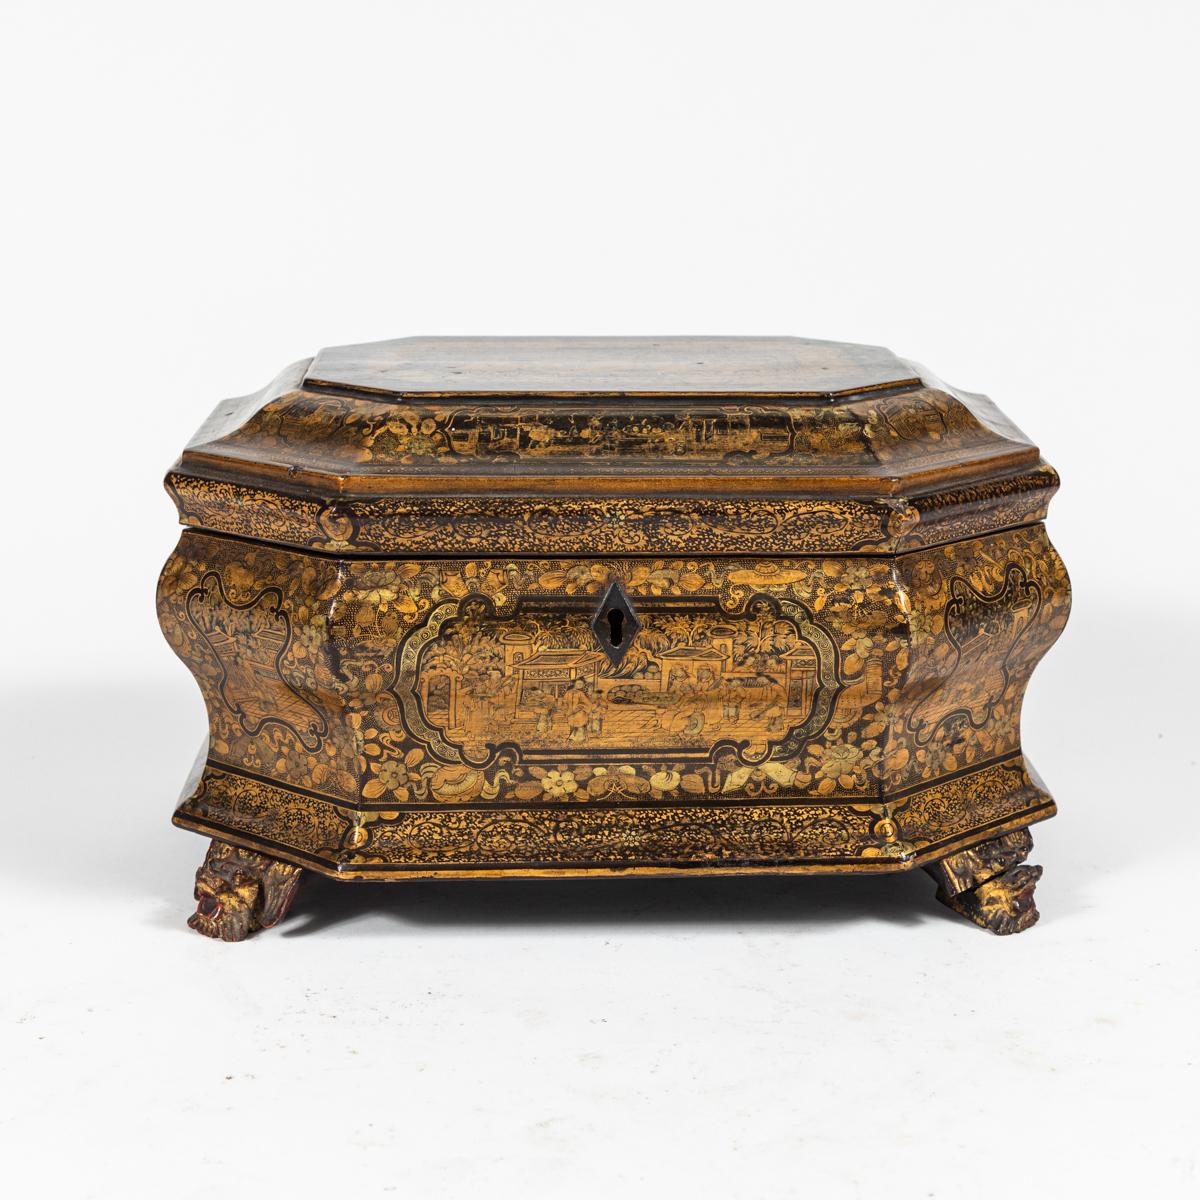 1820s lacquered chinoiserie box on elegant carved feet. Produced at the height of England's craze for Chinese lacquerware, this item features an extremely intricate gold-toned pattern on its surface. An excellent example of the craftsmanship of this